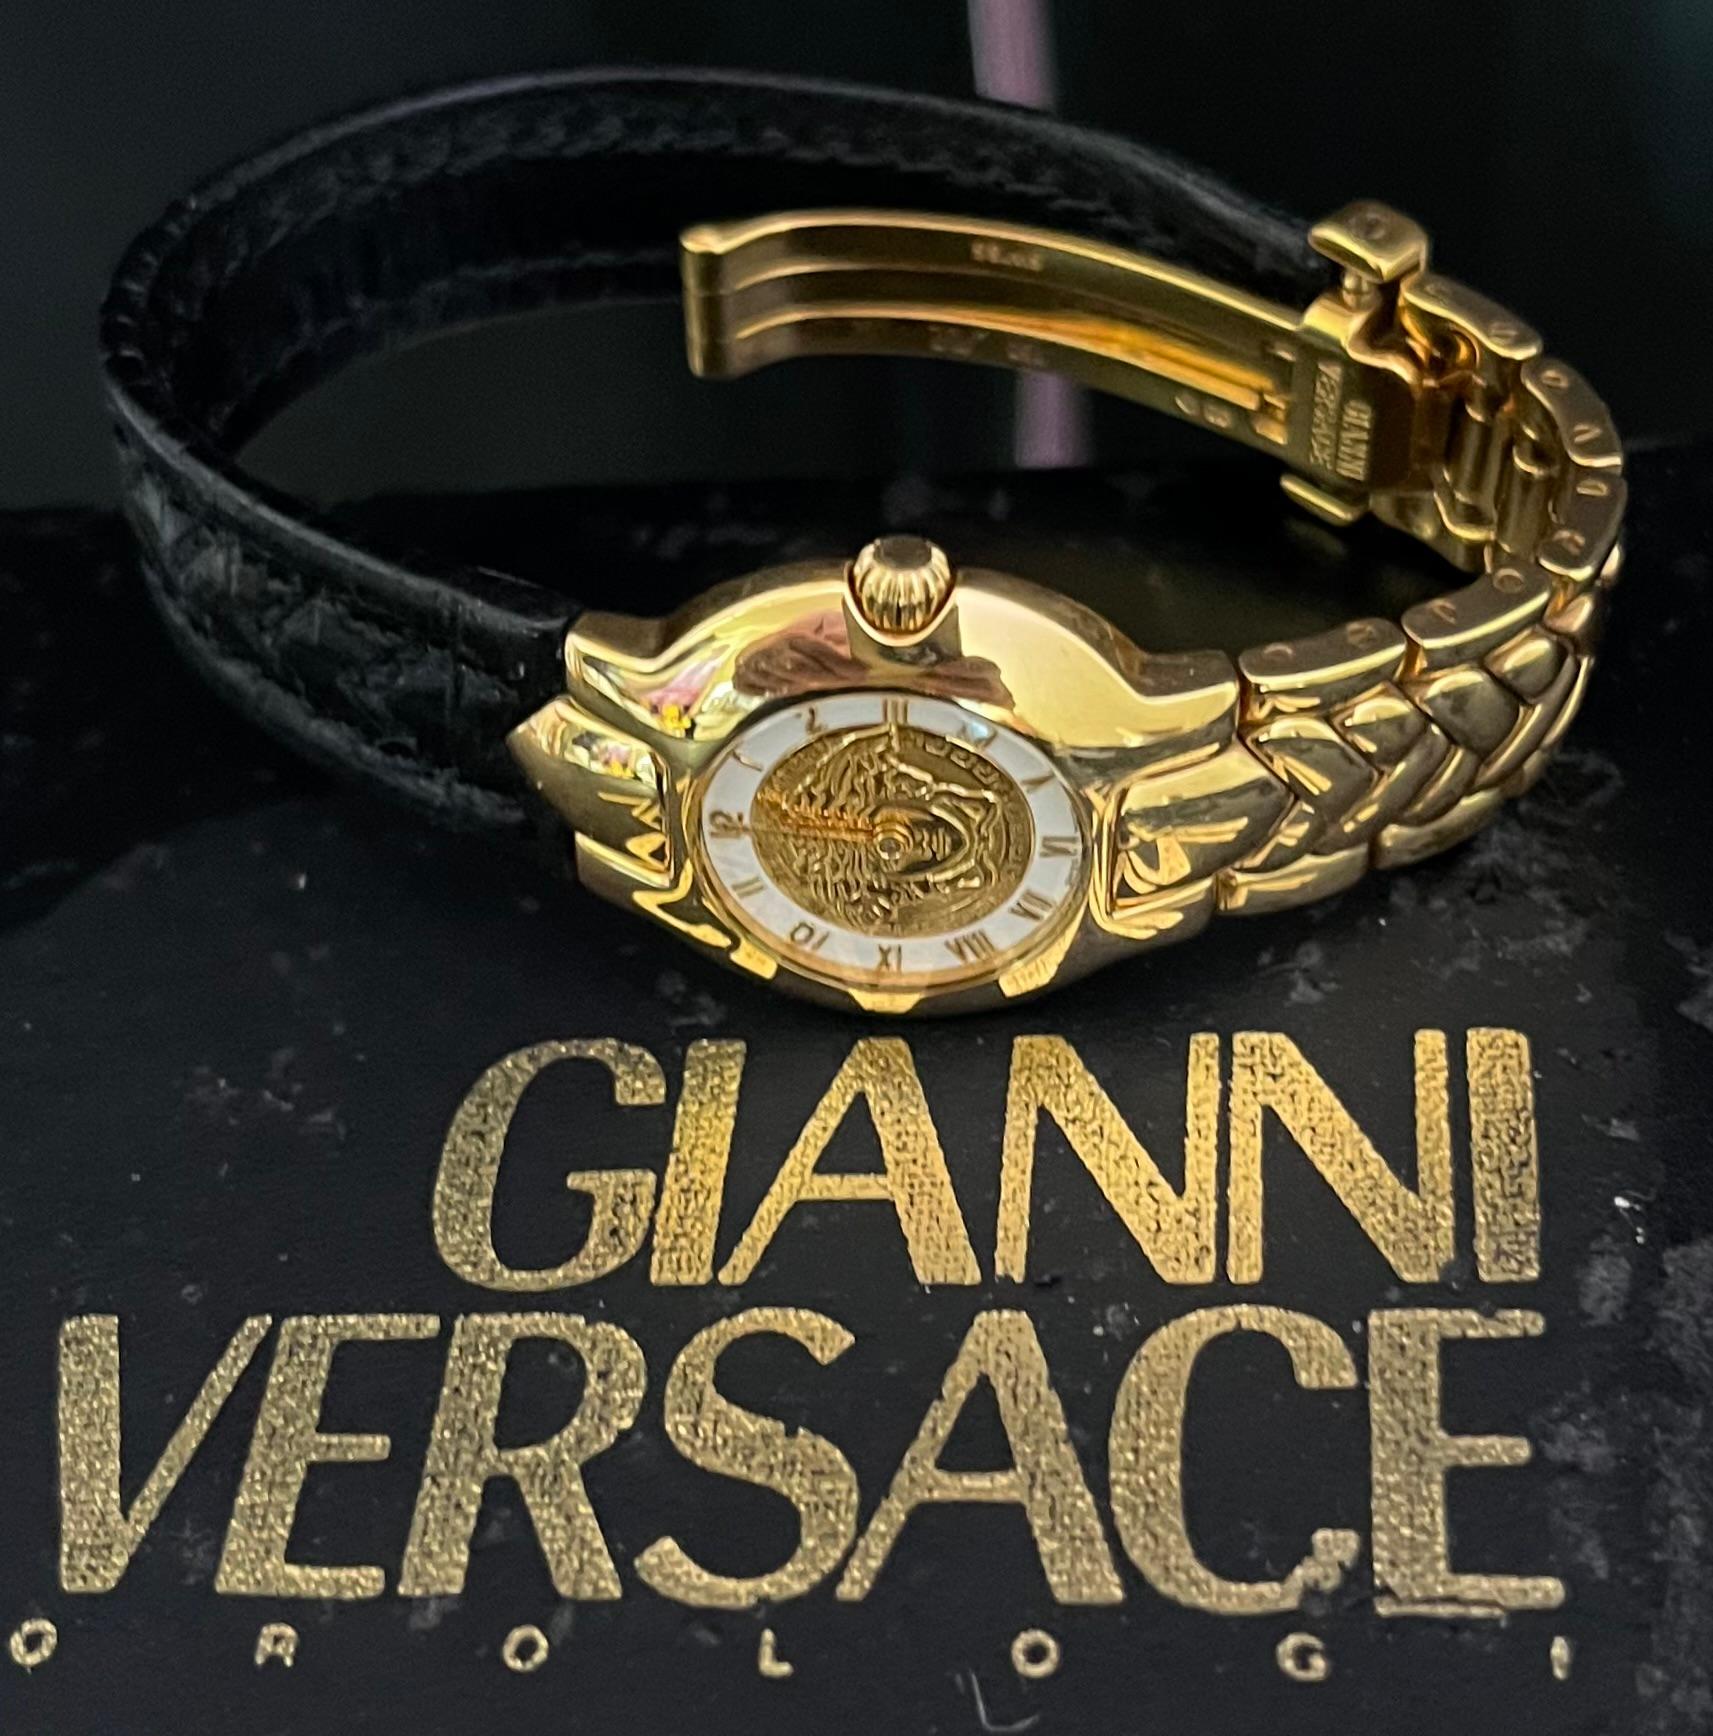 GIANNI VERSACE LIMITED EDITION
ONLY 500 WERE MADE, THE WATCH IS #104


Case: 18k yellow gold, 24 mm, back secured with screws, recessed crown
Dial: white with golden Arabic and Roman numerals, golden Medusa at center
Movement: quartz
Band: upper